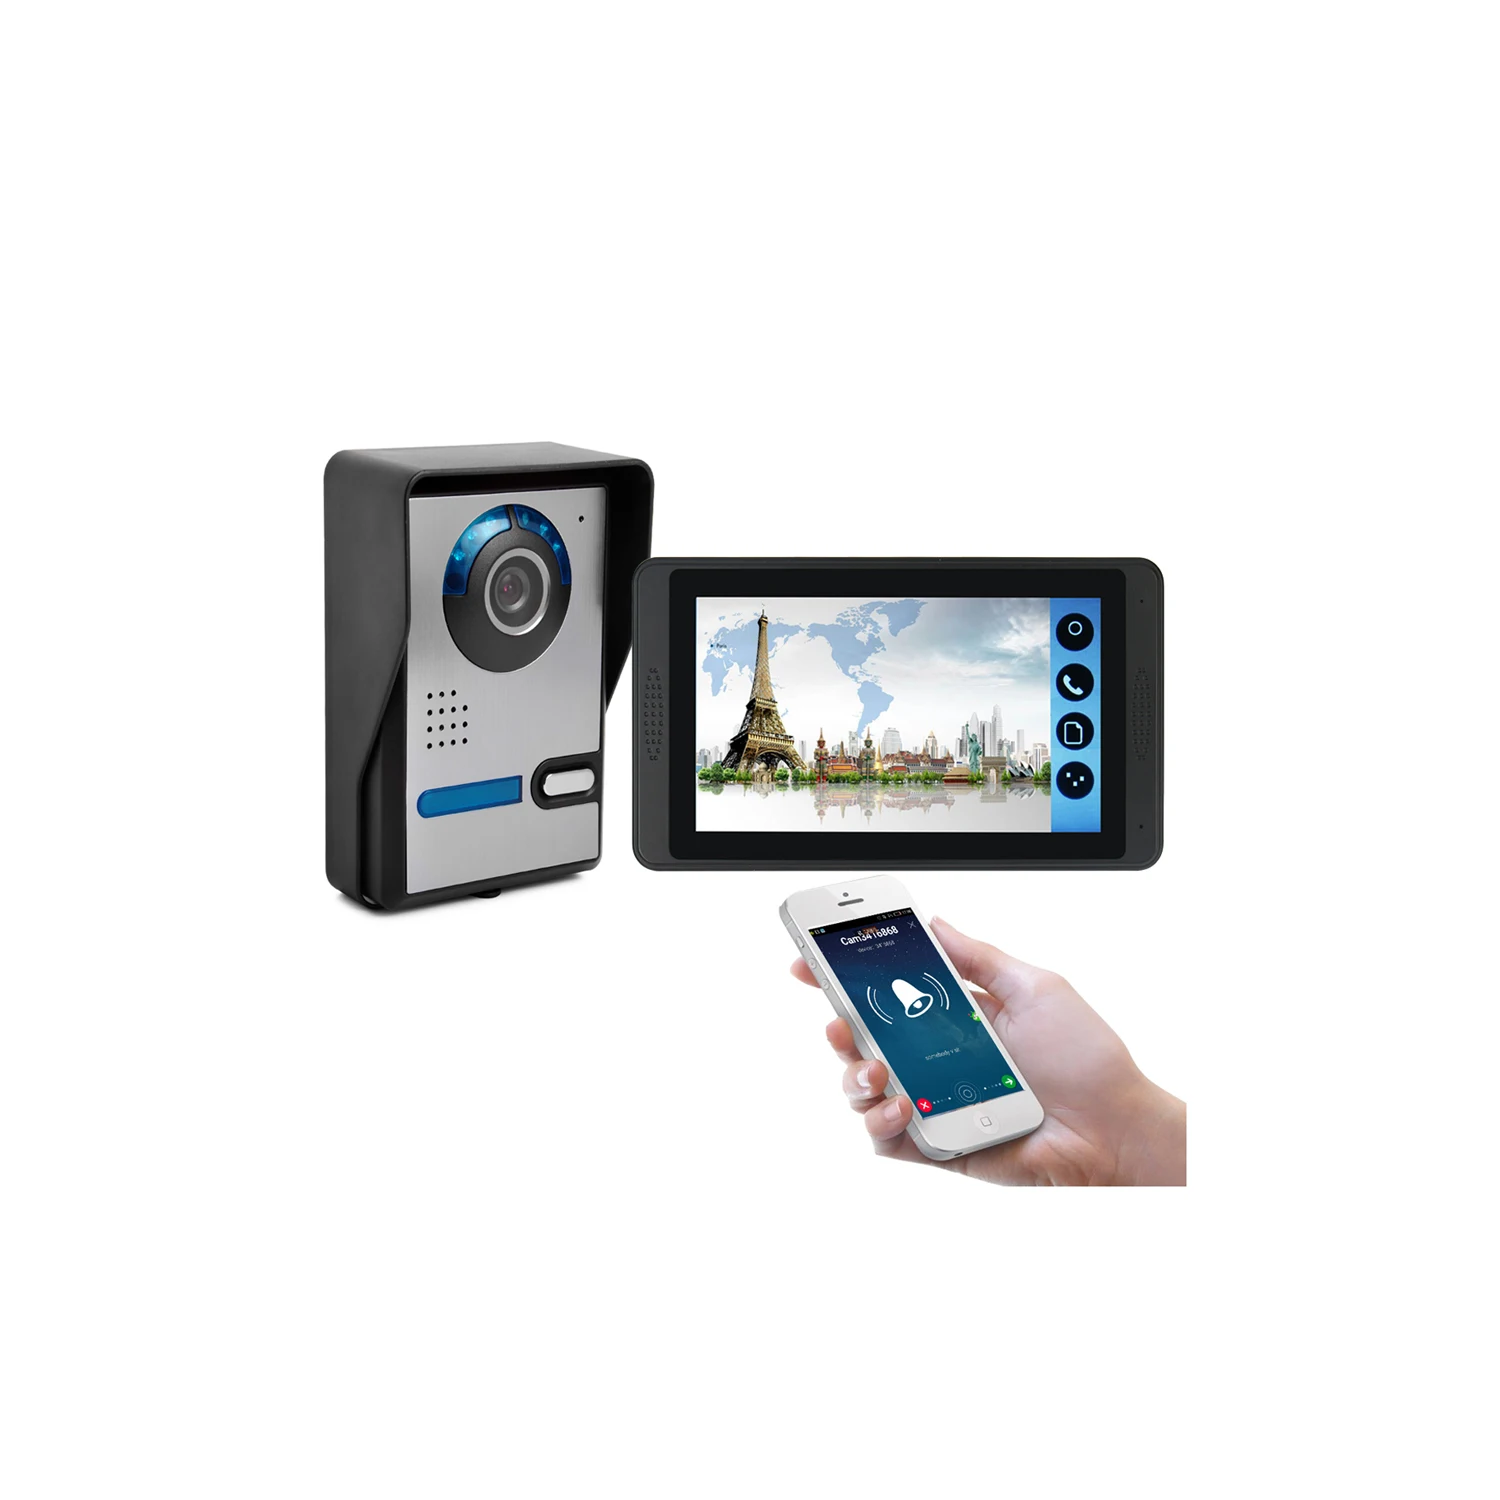 

7-inch capacitor touch WiFi wired video doorbell with video camera mobile phone remote call unlocking visual intercom